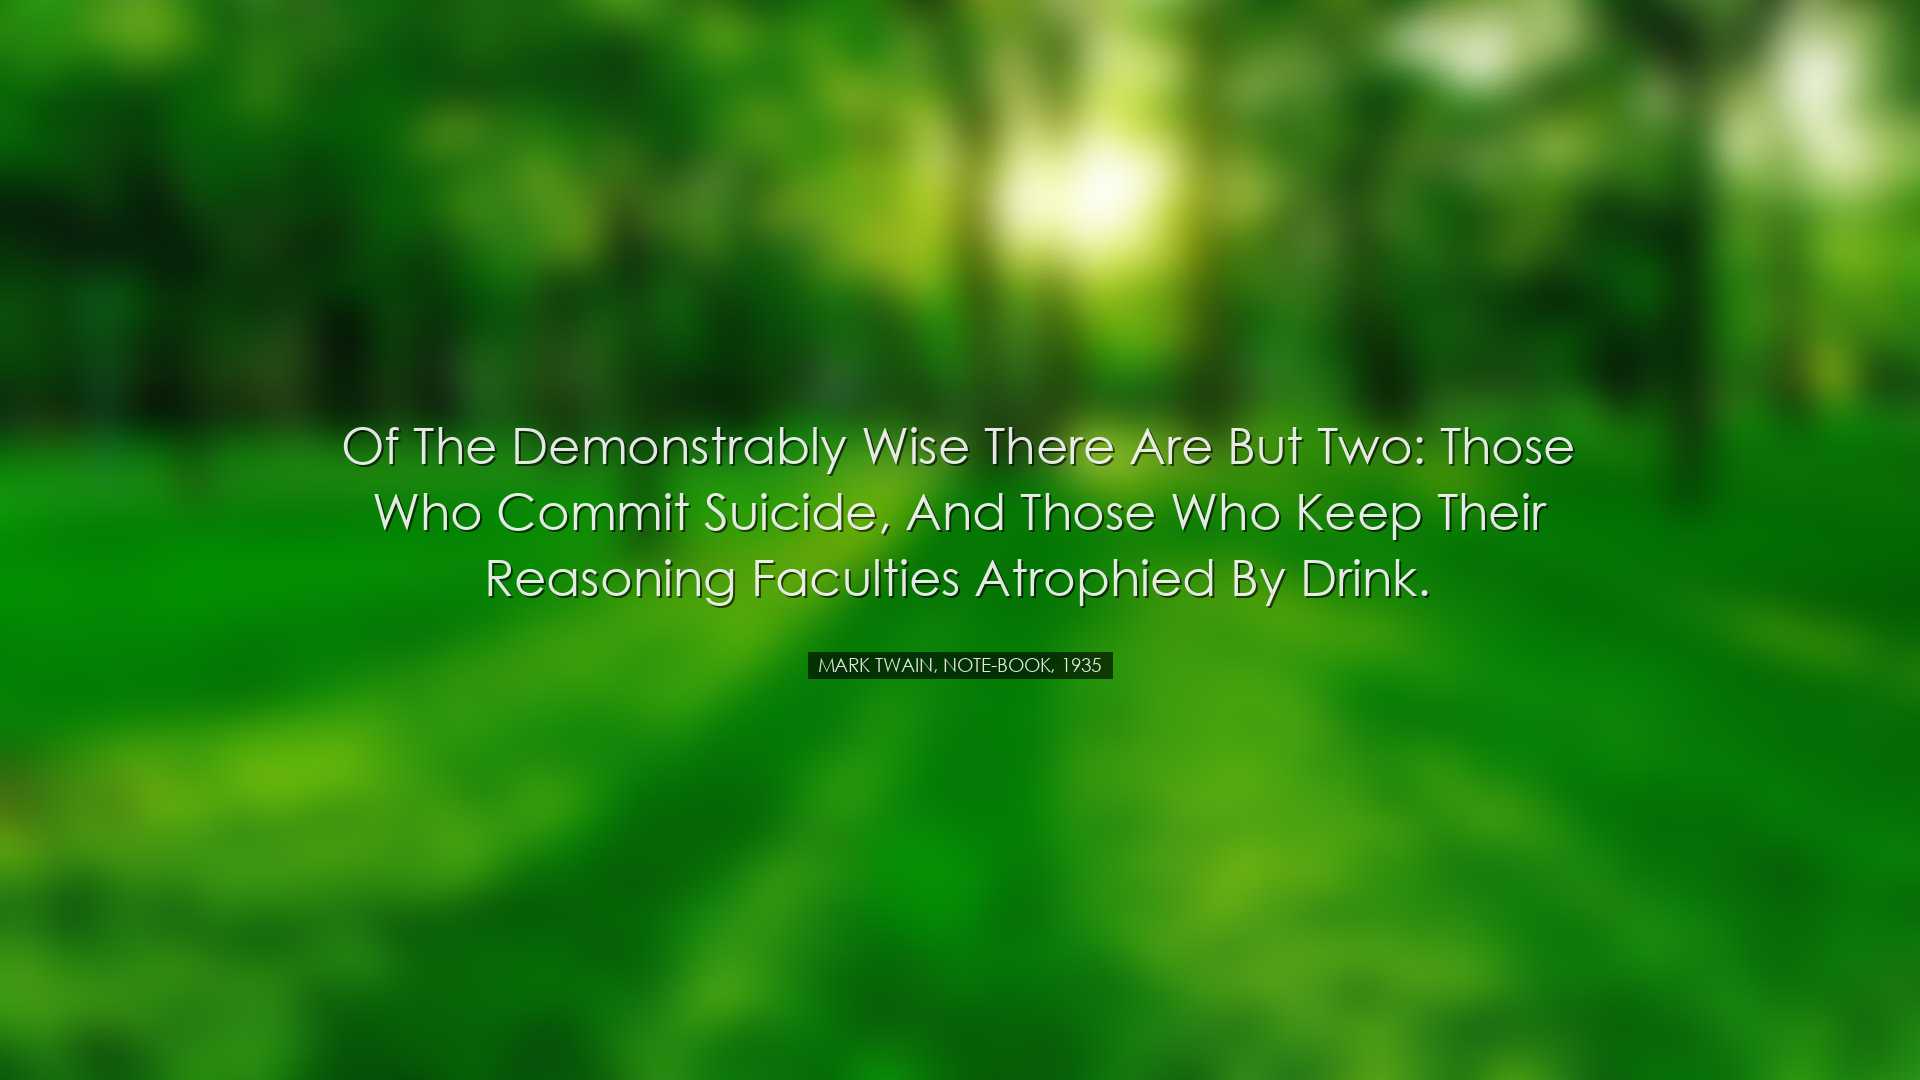 Of the demonstrably wise there are but two: those who commit suici